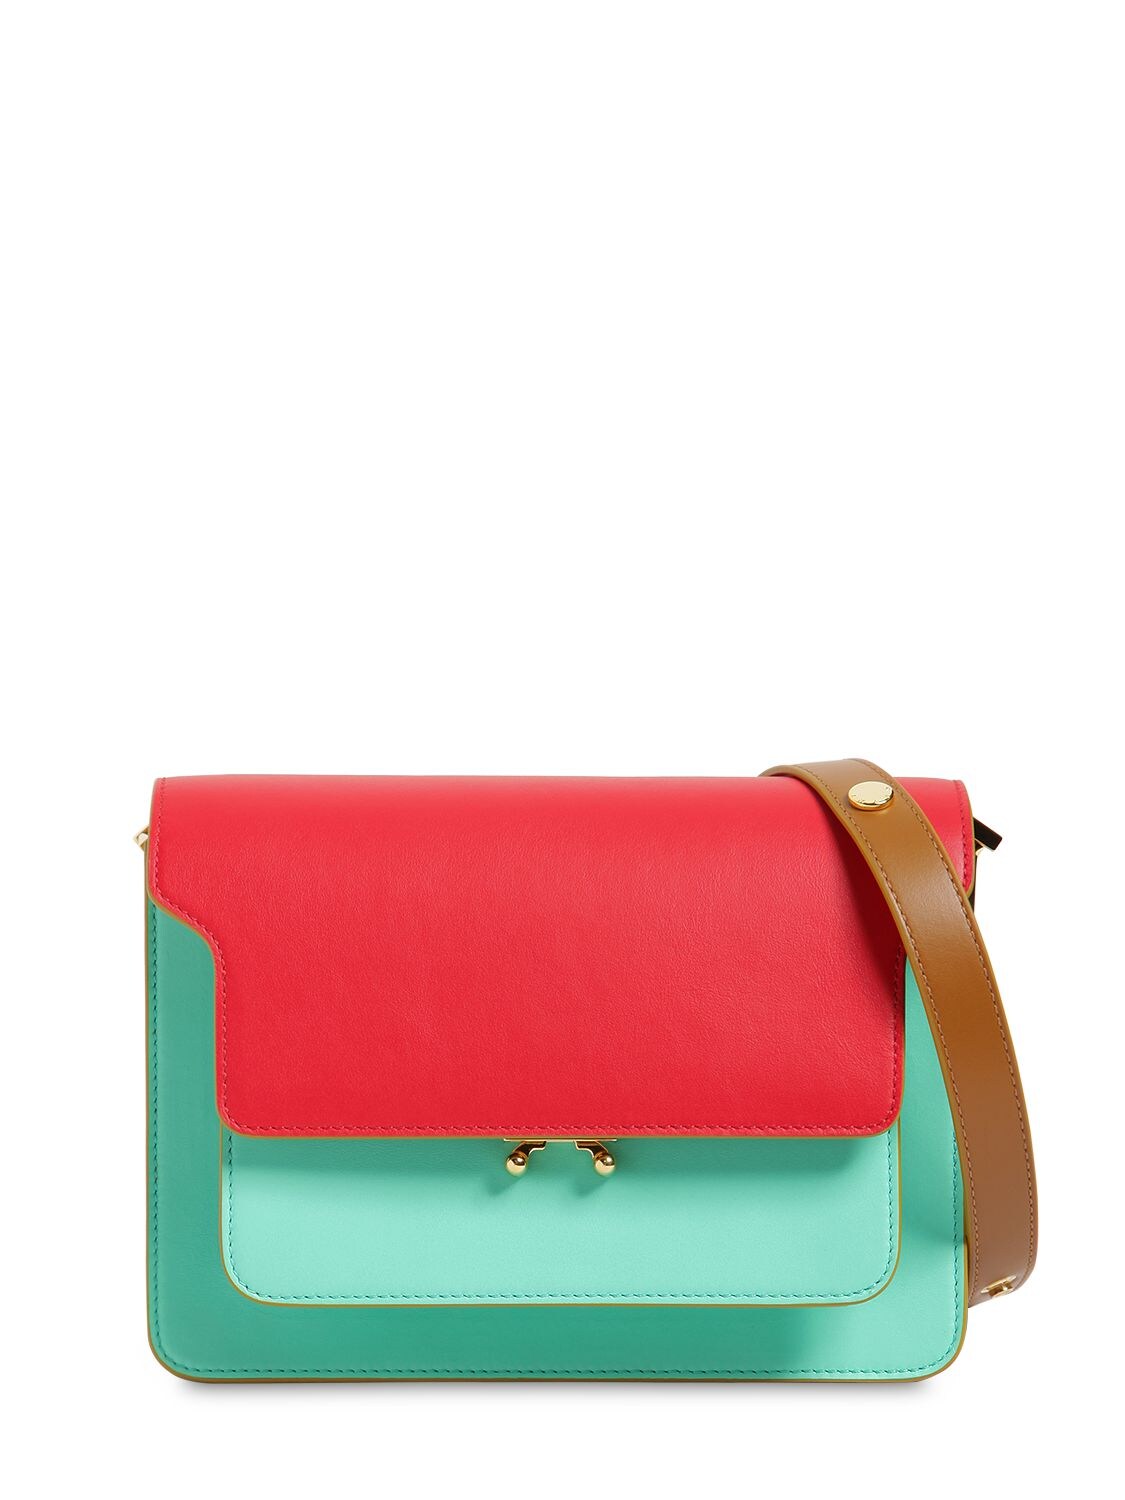 Medium Tricolor Leather Trunk Bag In Red,light Blue